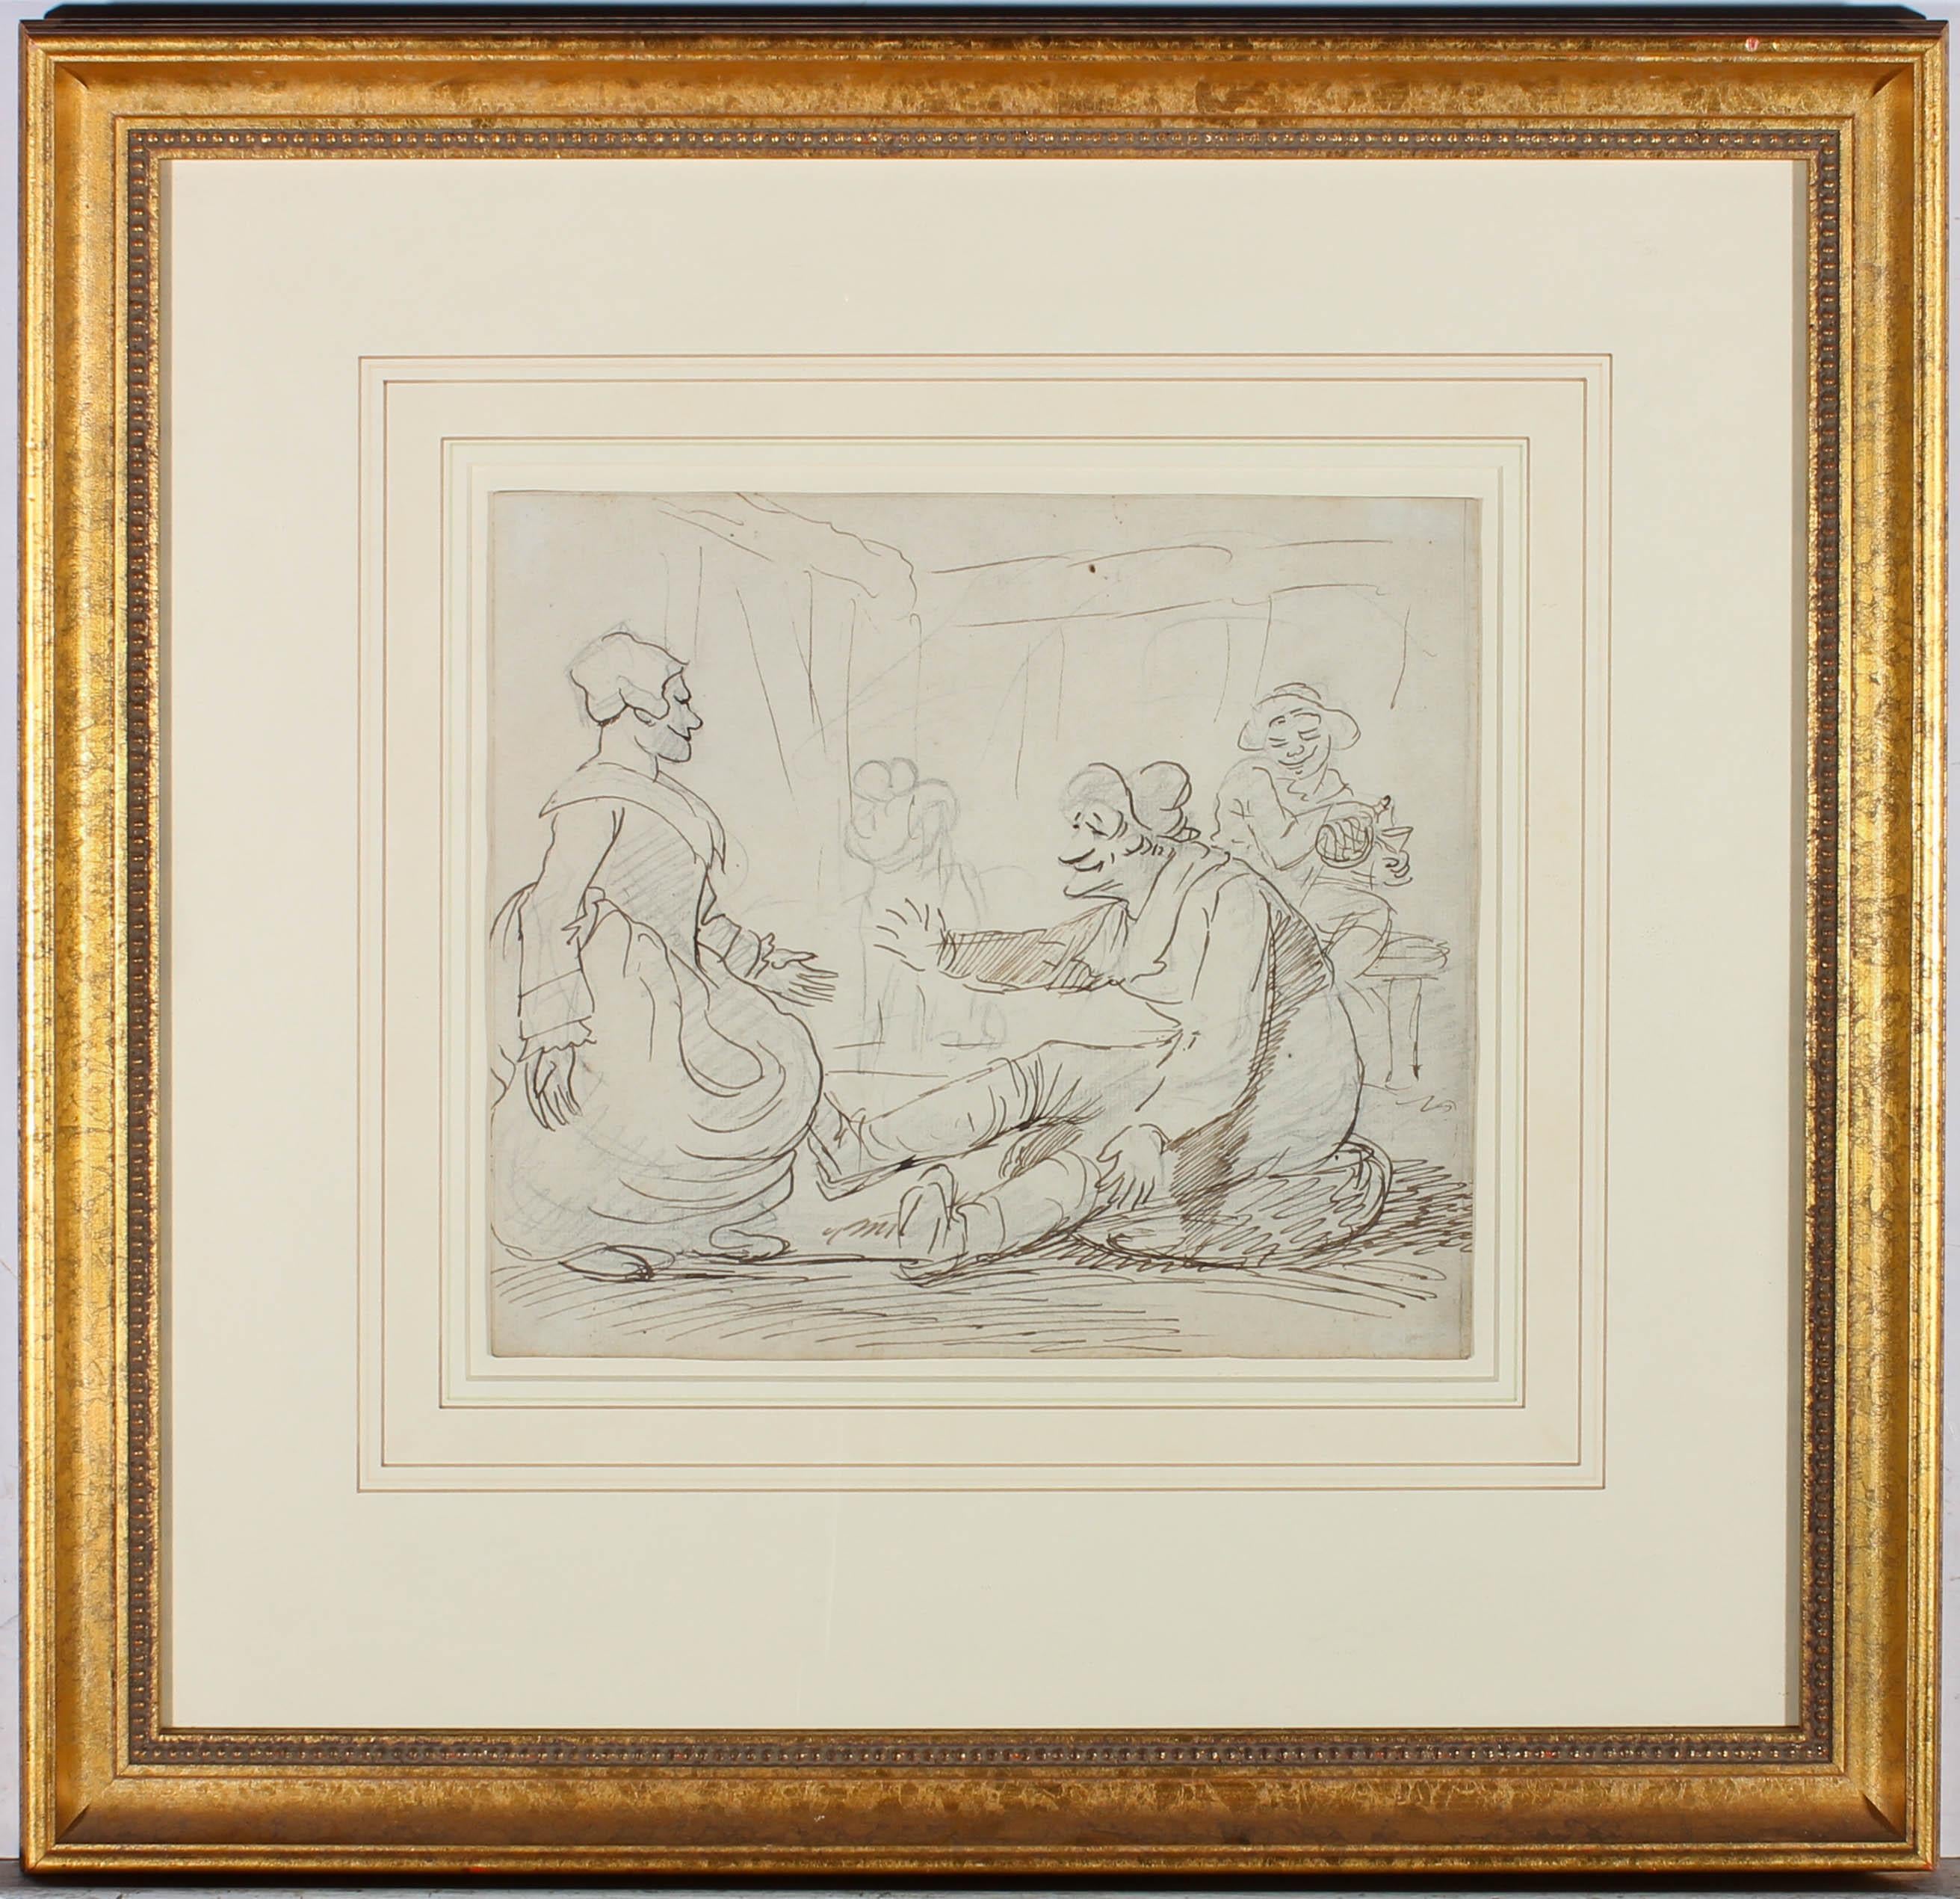 Unknown Figurative Art - Framed Early 19th Century Pen and Ink Drawing - Happy Tavern Drinker